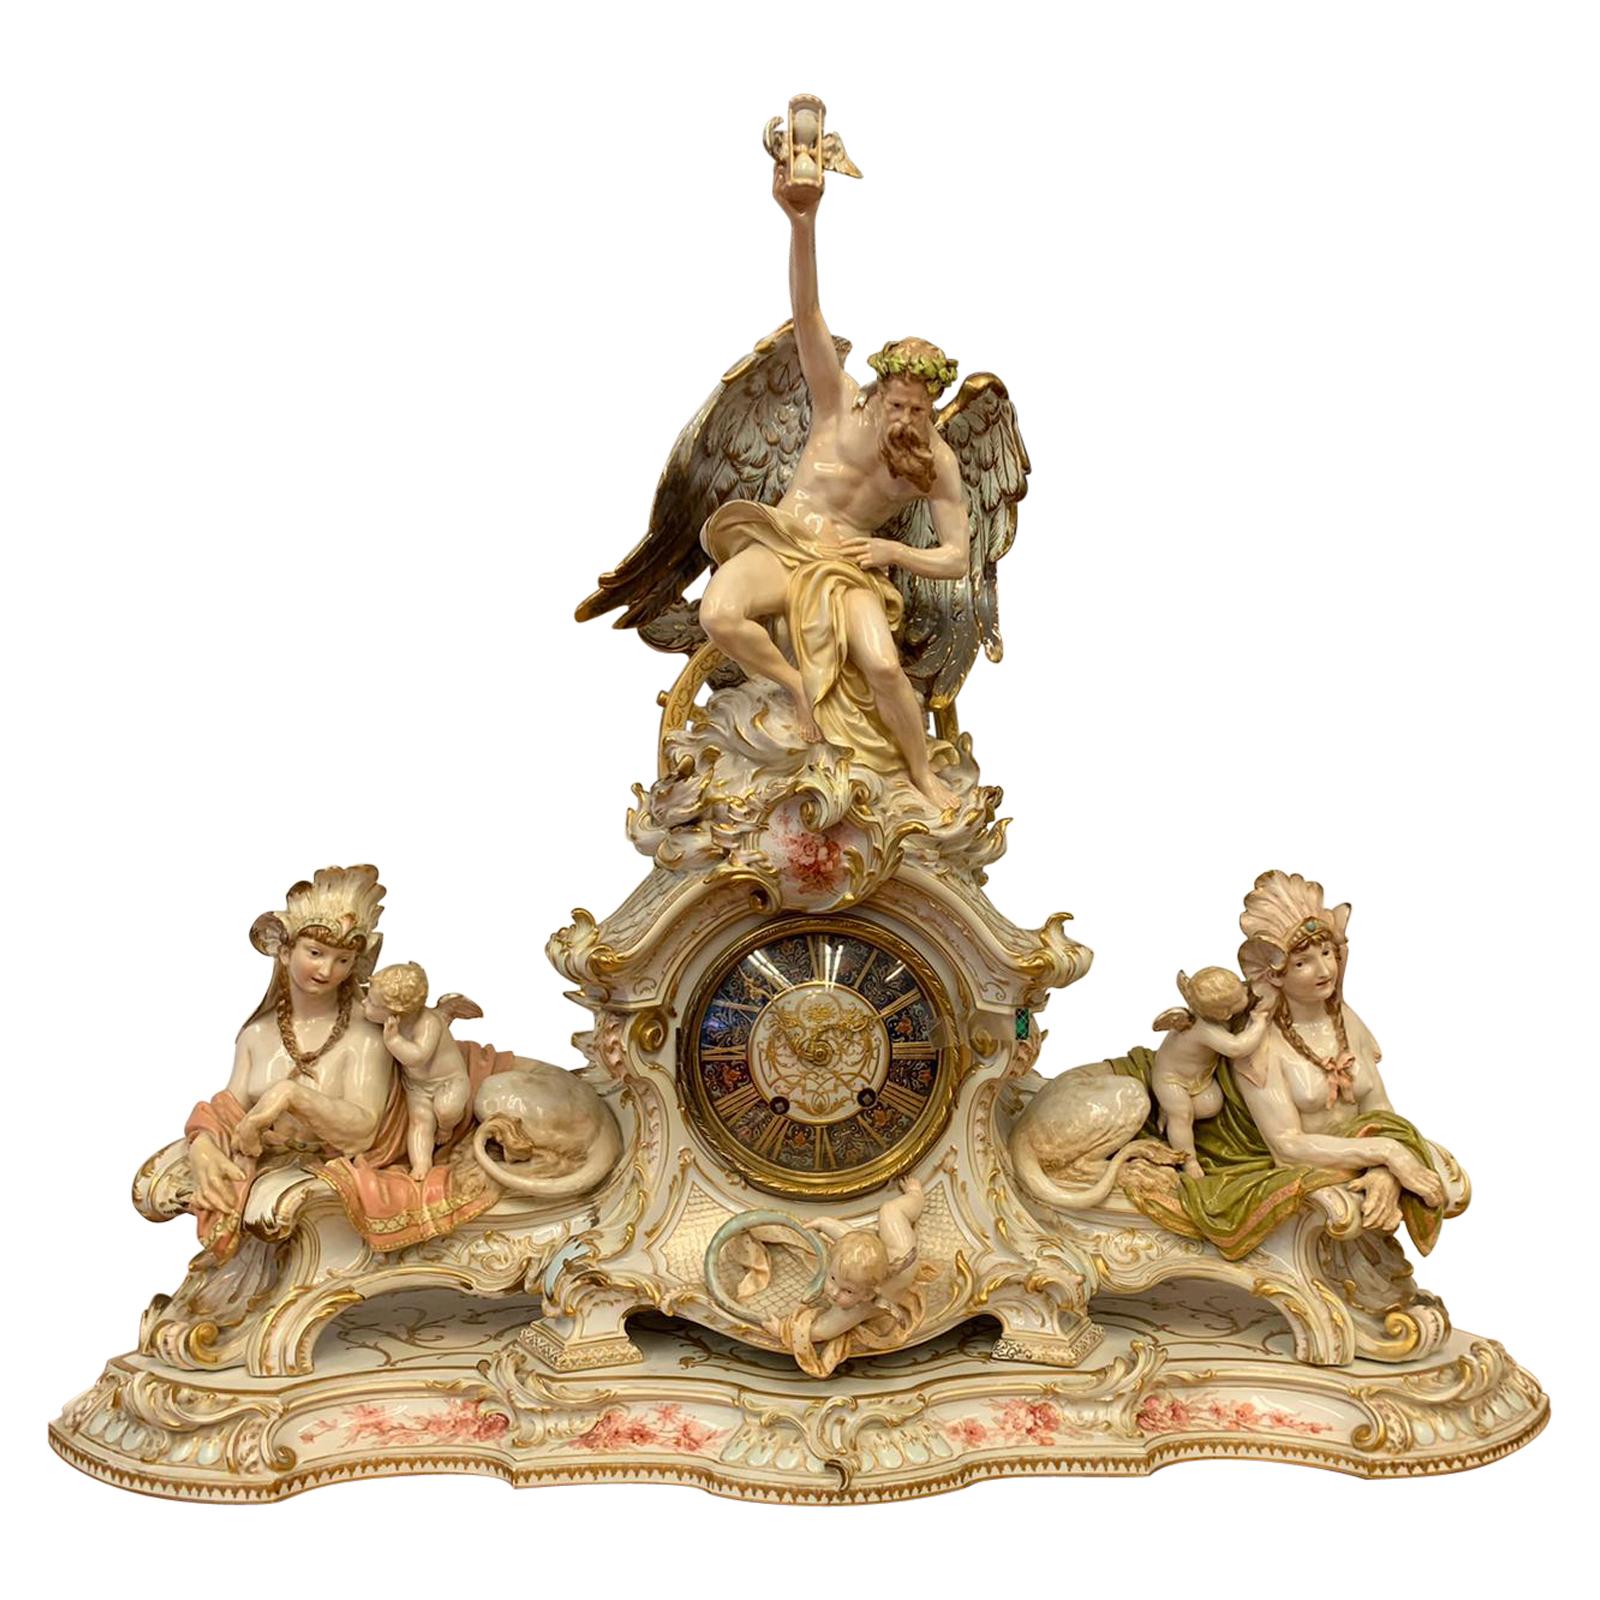 Porcelain Fireplace-Mantel Clock with Two Sphinxes and Cherubs KPM, Berlin